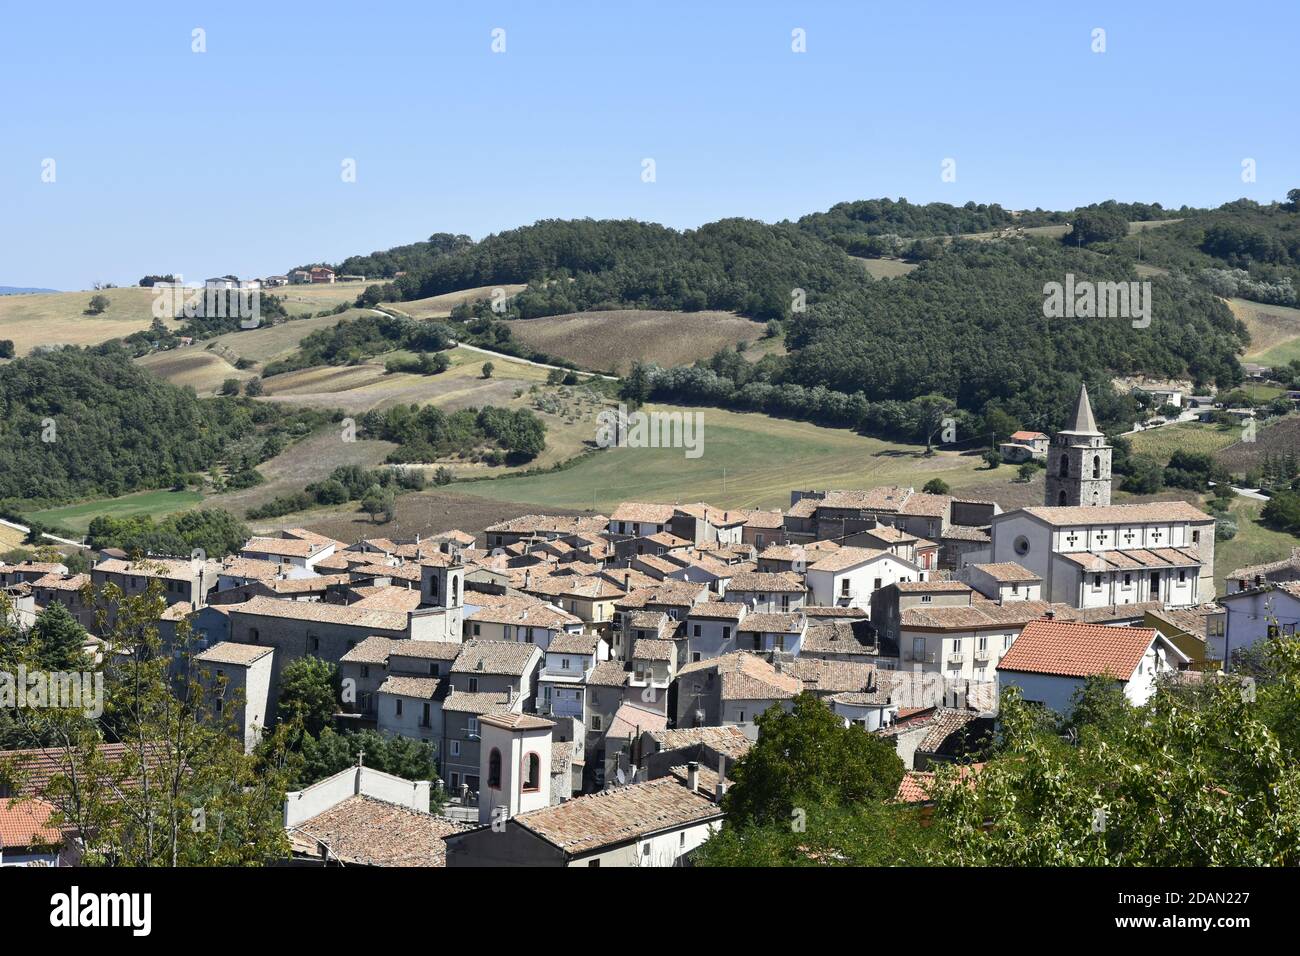 Panoramic view of Riccia, a village in the mountains of the Molise region, Italy. Stock Photo